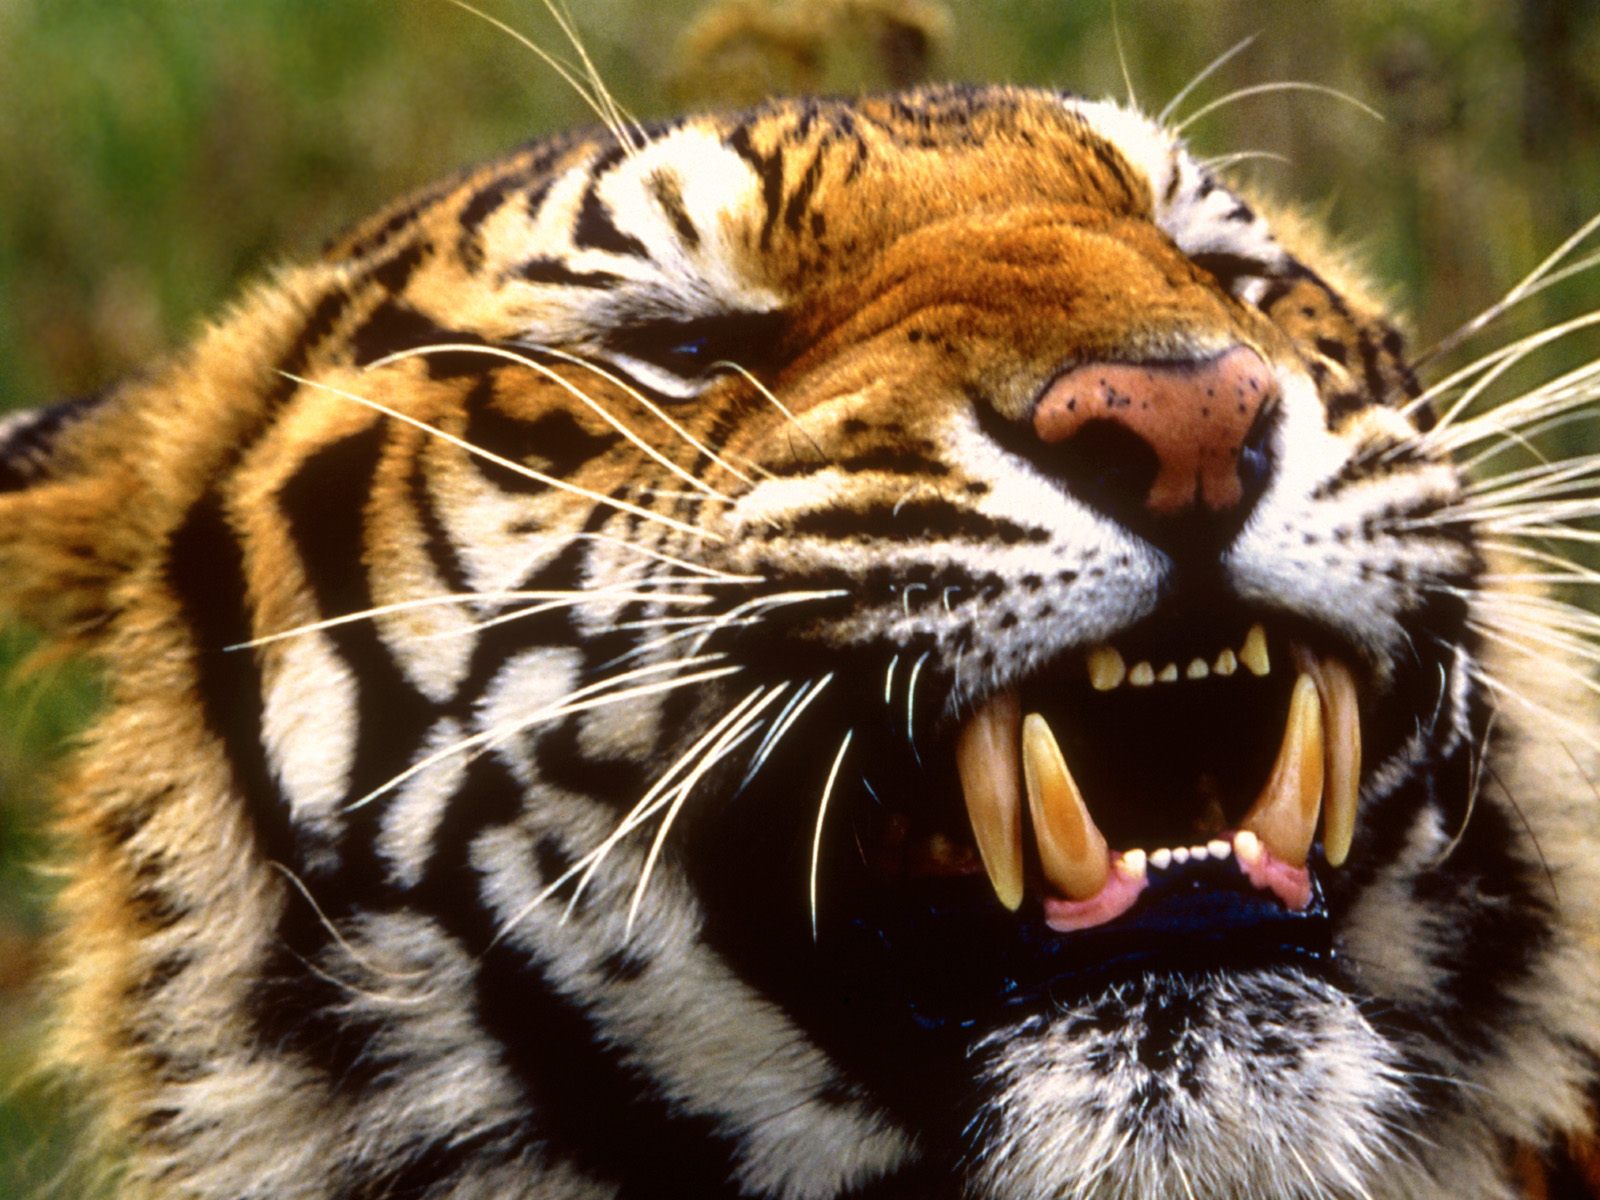  Tigers HD Wallpapers Tiger Wallpaper for Desktop Backgrounds Free